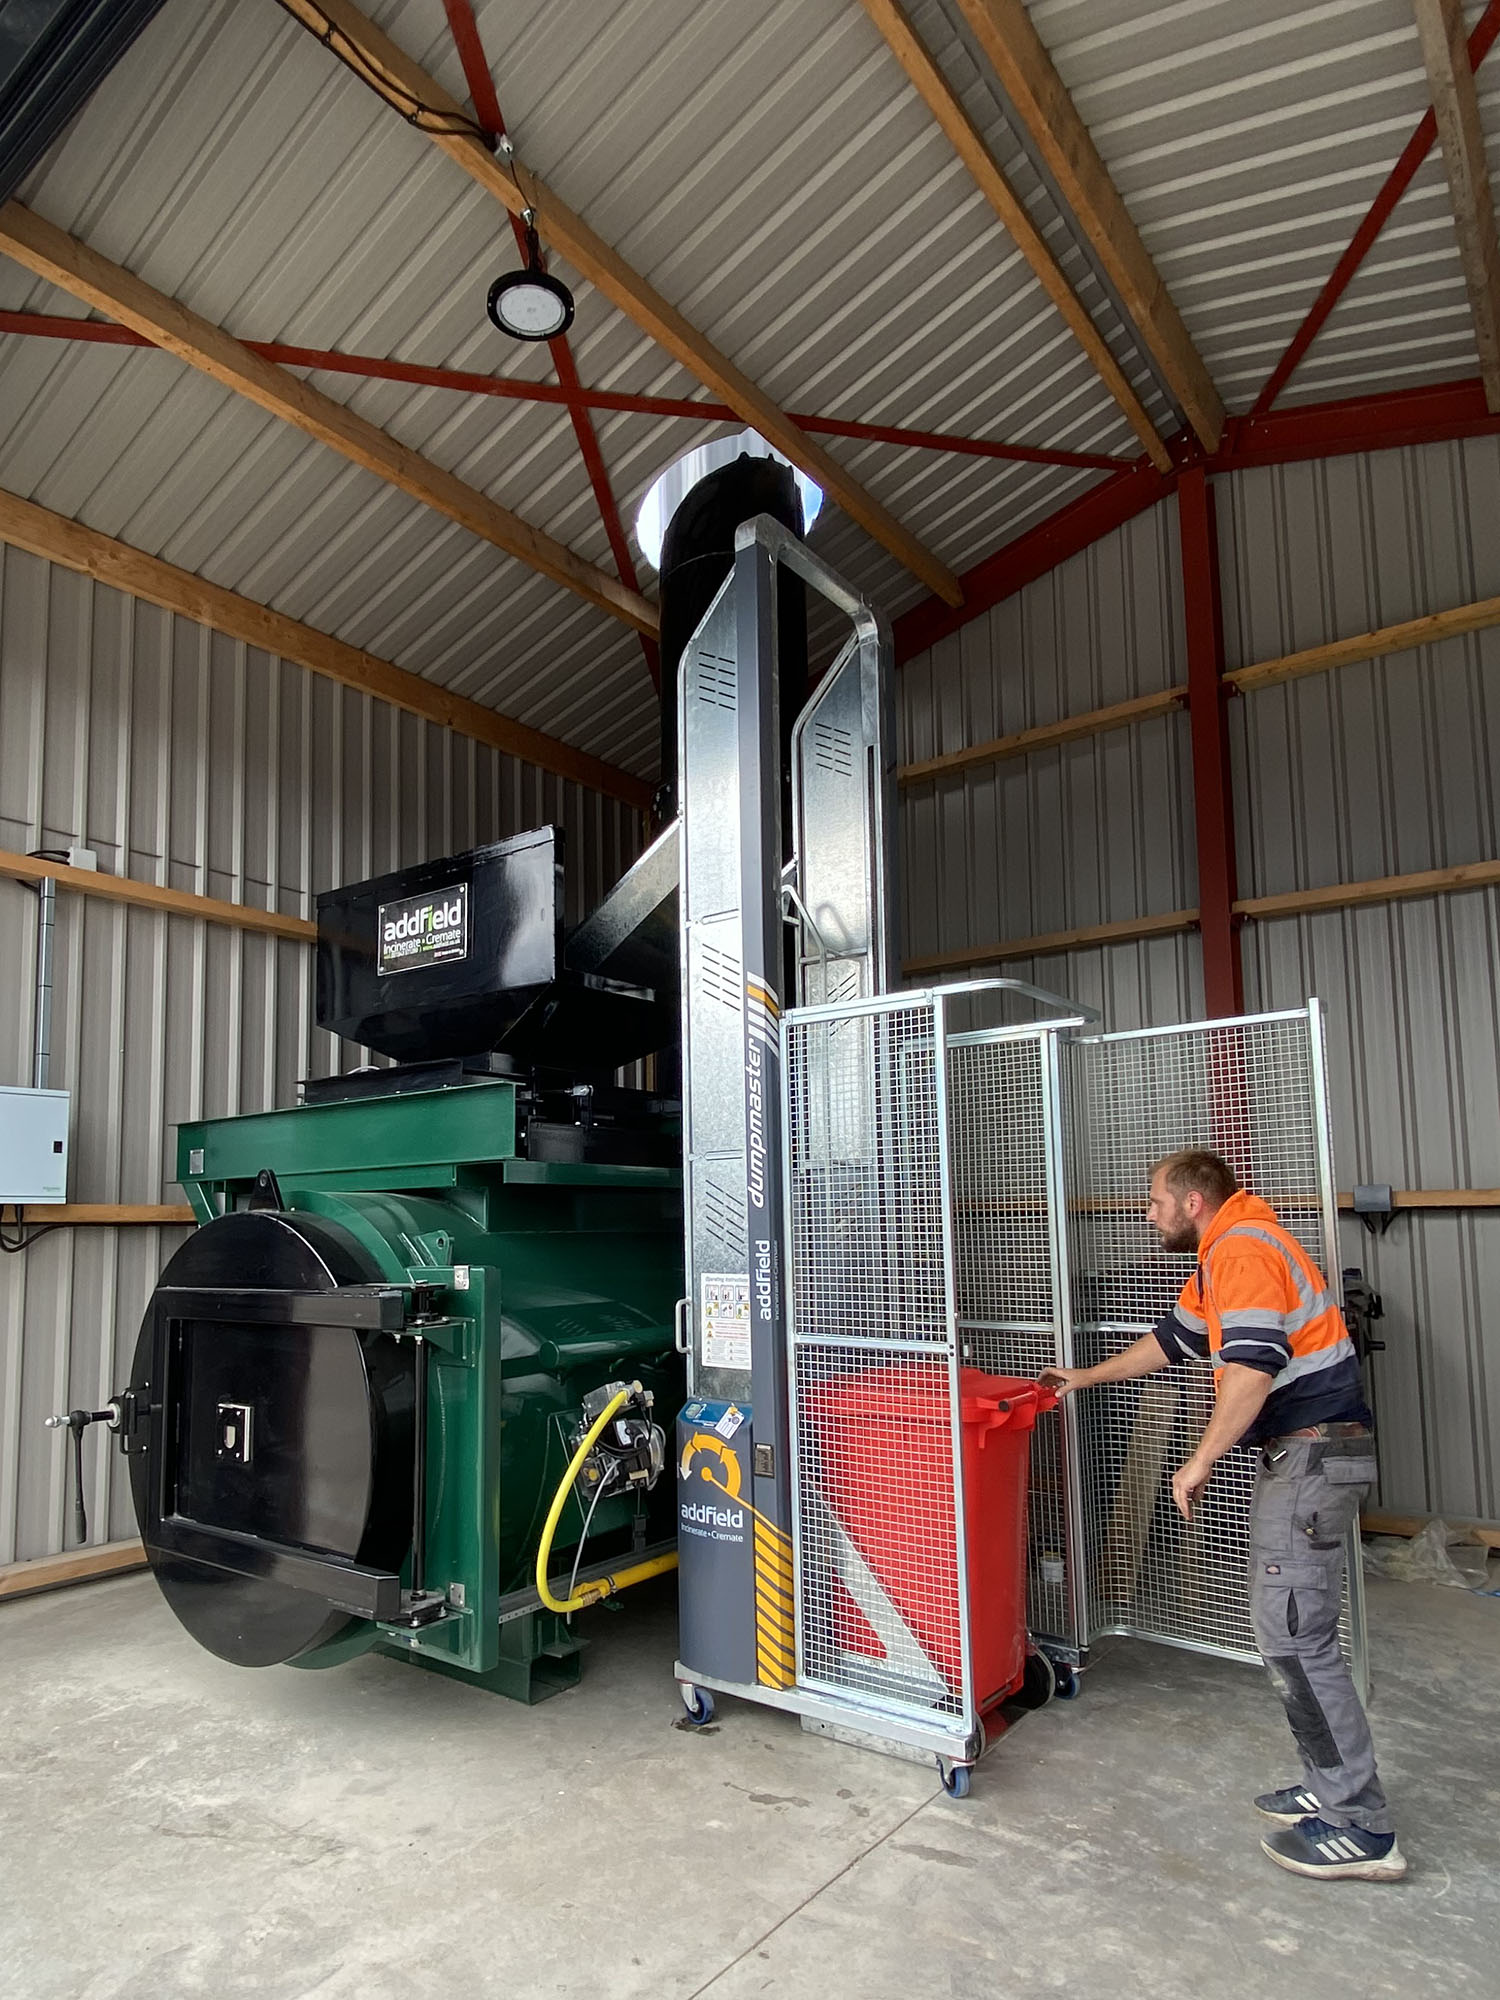 Agricultural incinerator being loaded